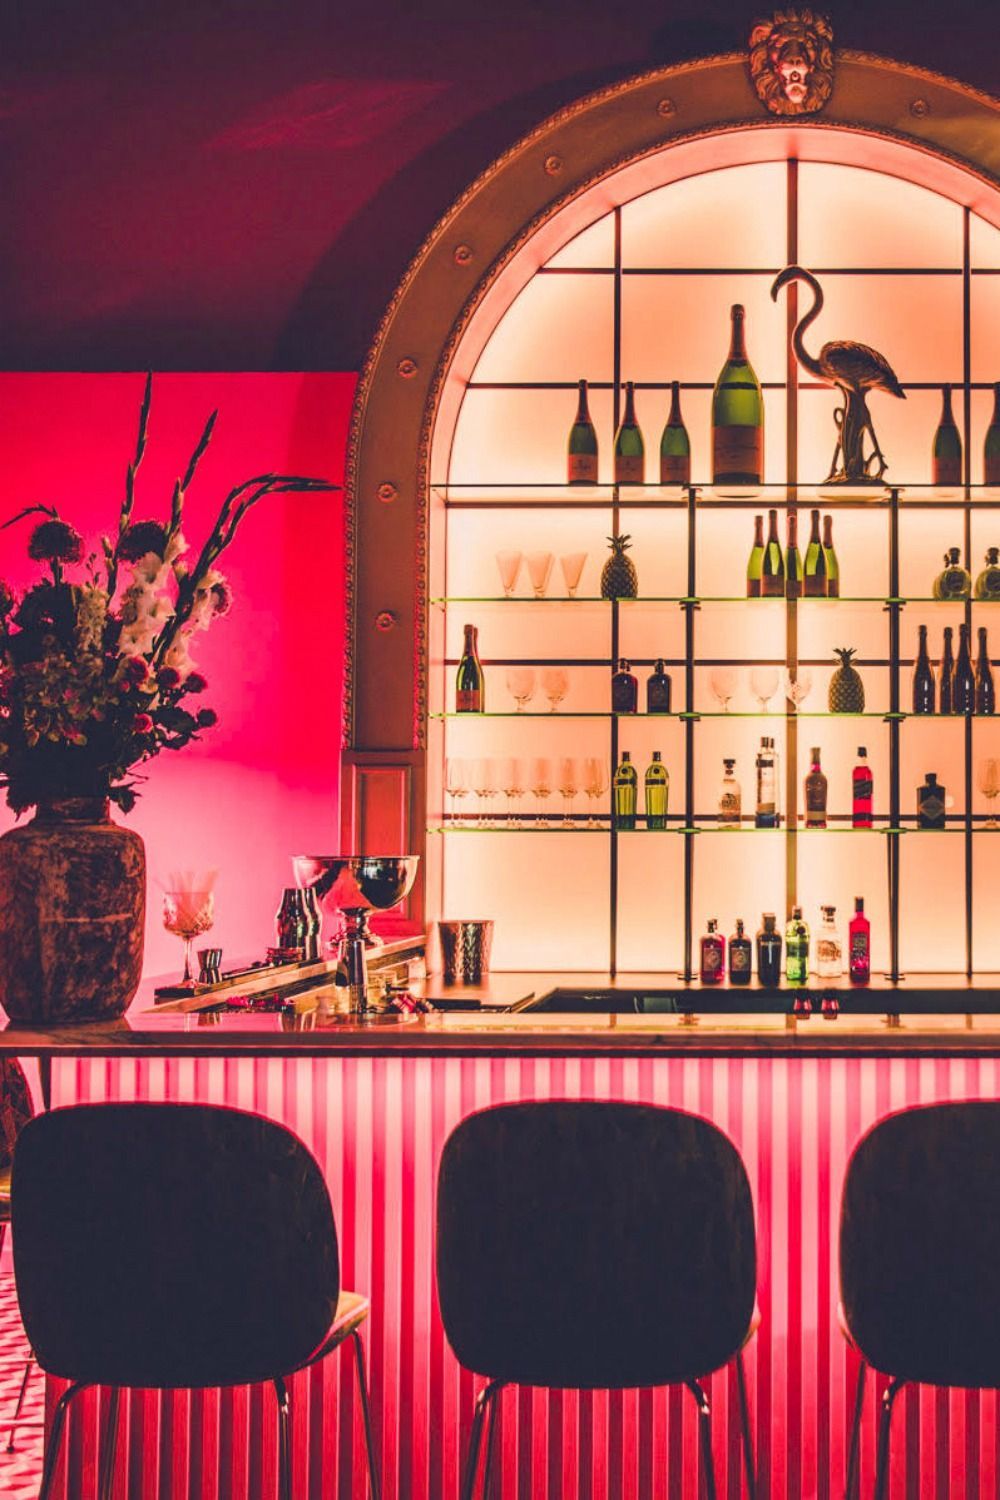 Copenhagen Guide: 5 Places You MUST Visit When In Copenhagen! - Copenhagen Guide: 5 Places You MUST Visit When In Copenhagen! -   16 beauty Bar neon ideas